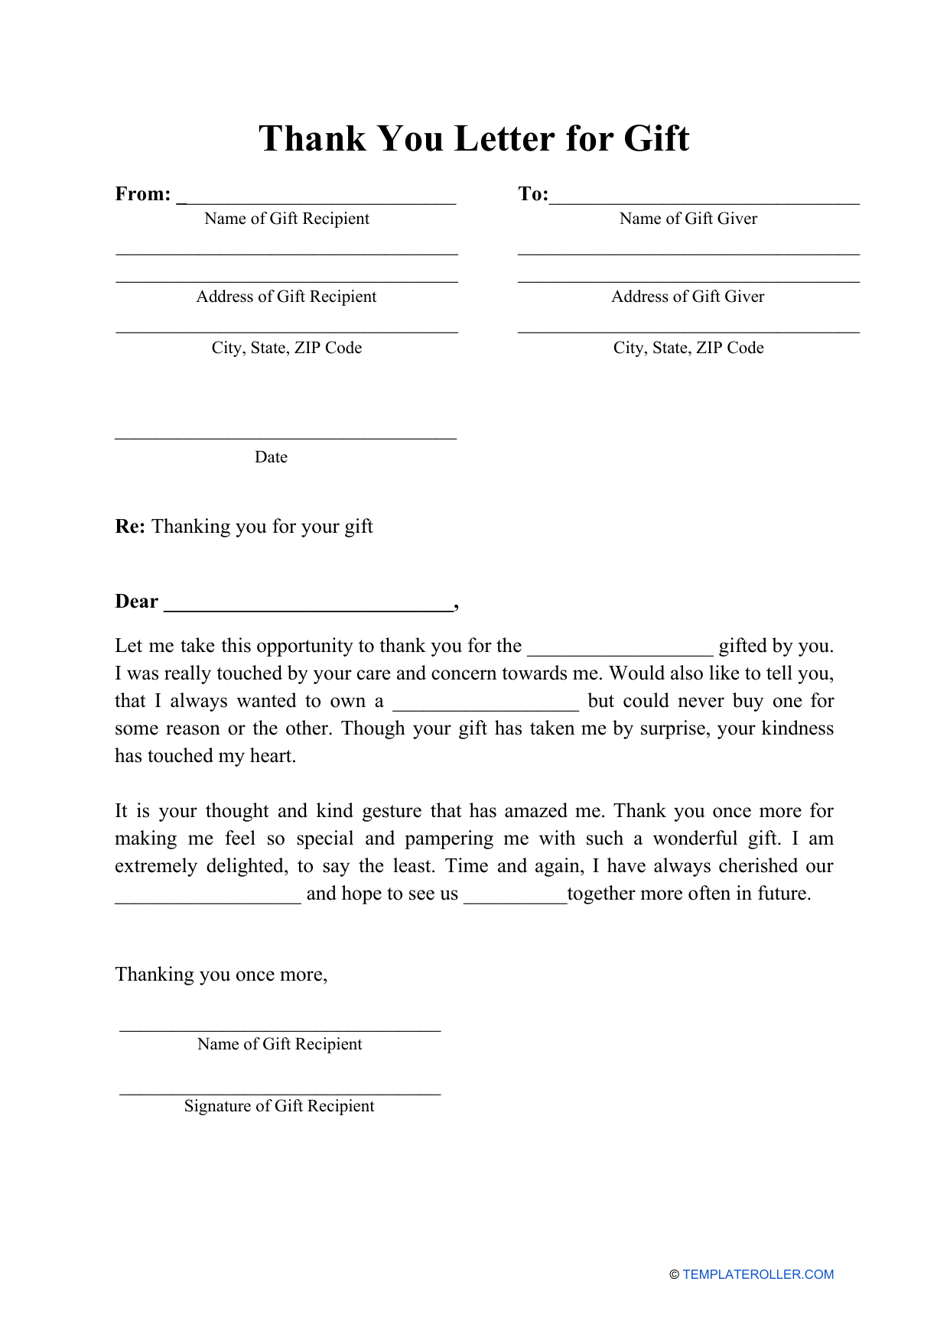 Thank You Letter for Gift Template - Preview Image